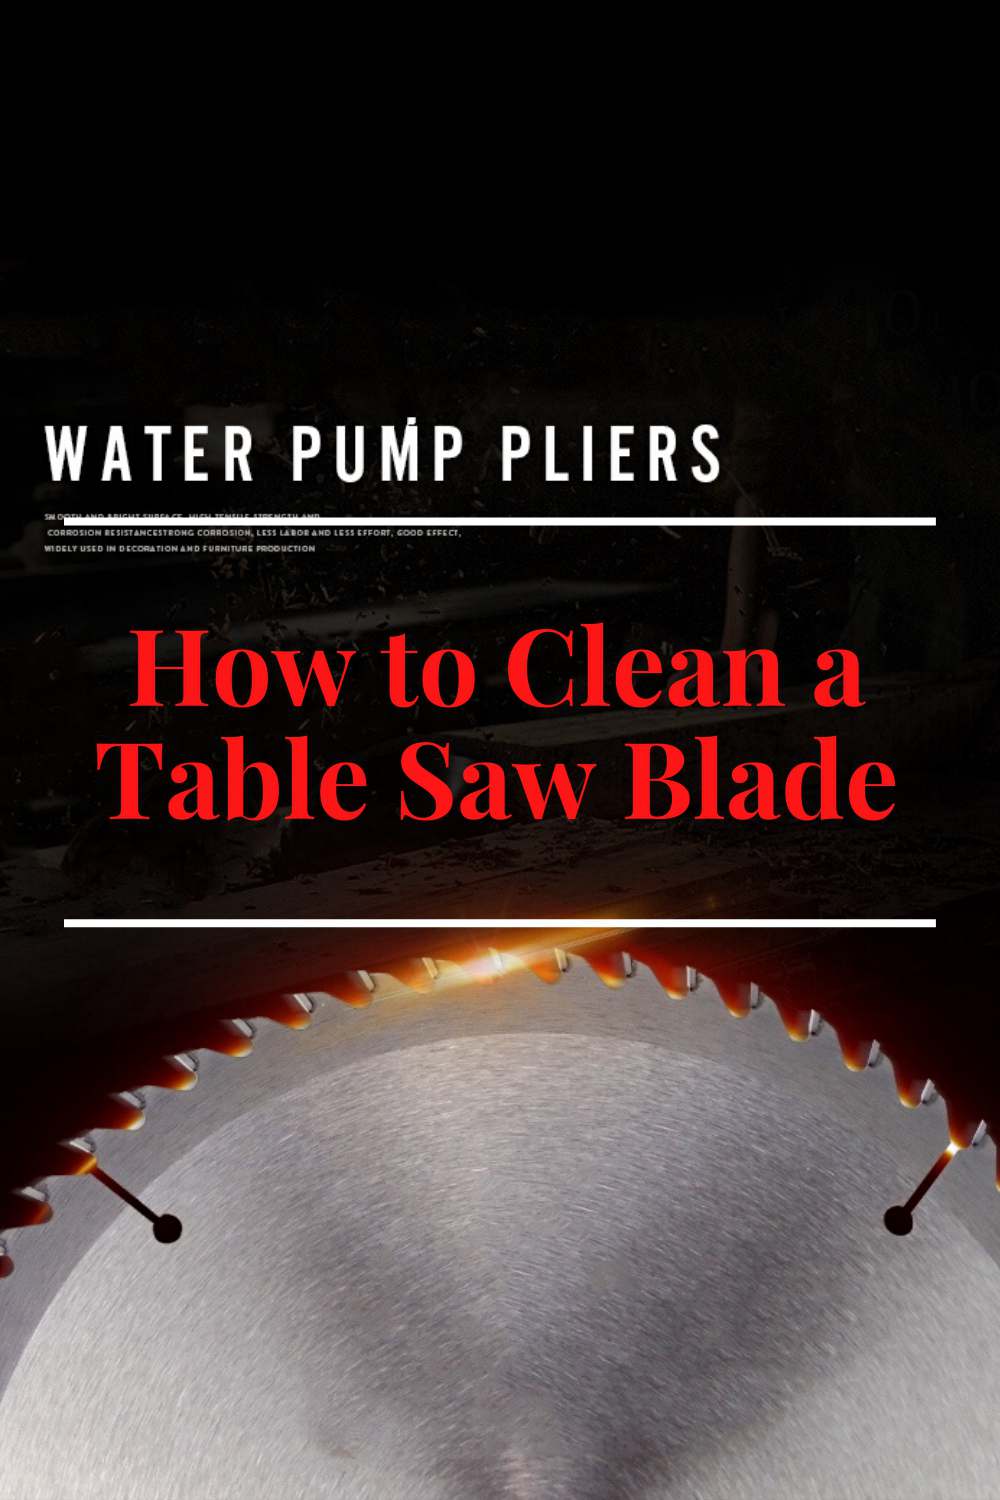 How to Clean a Table Saw Blade